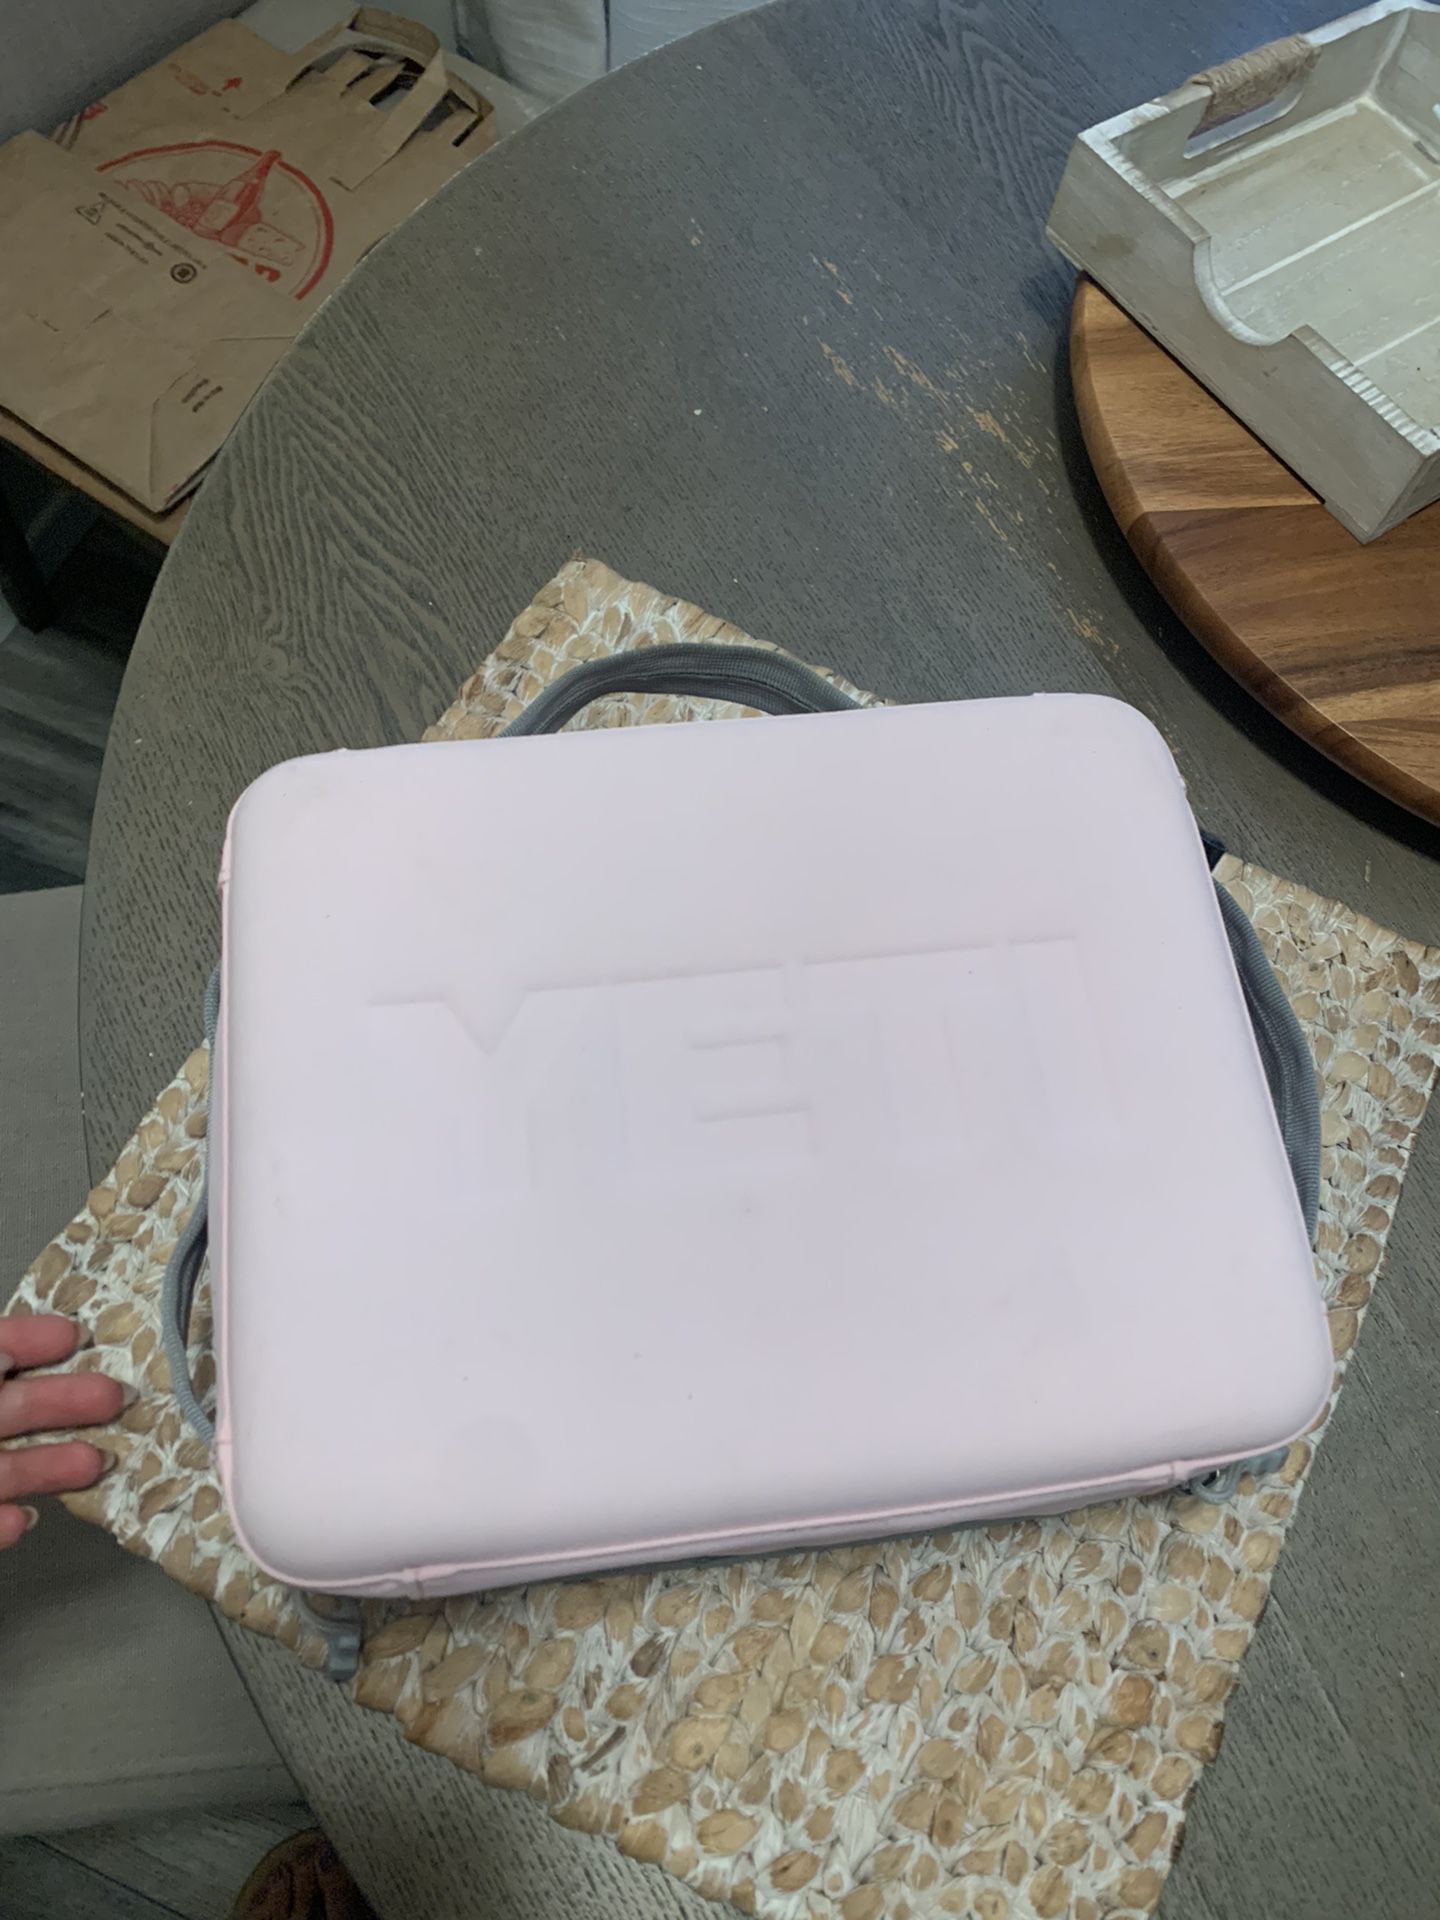 YETI Daytrip Lunchbox Soldout ICEPINK for Sale in Oceanside, CA - OfferUp